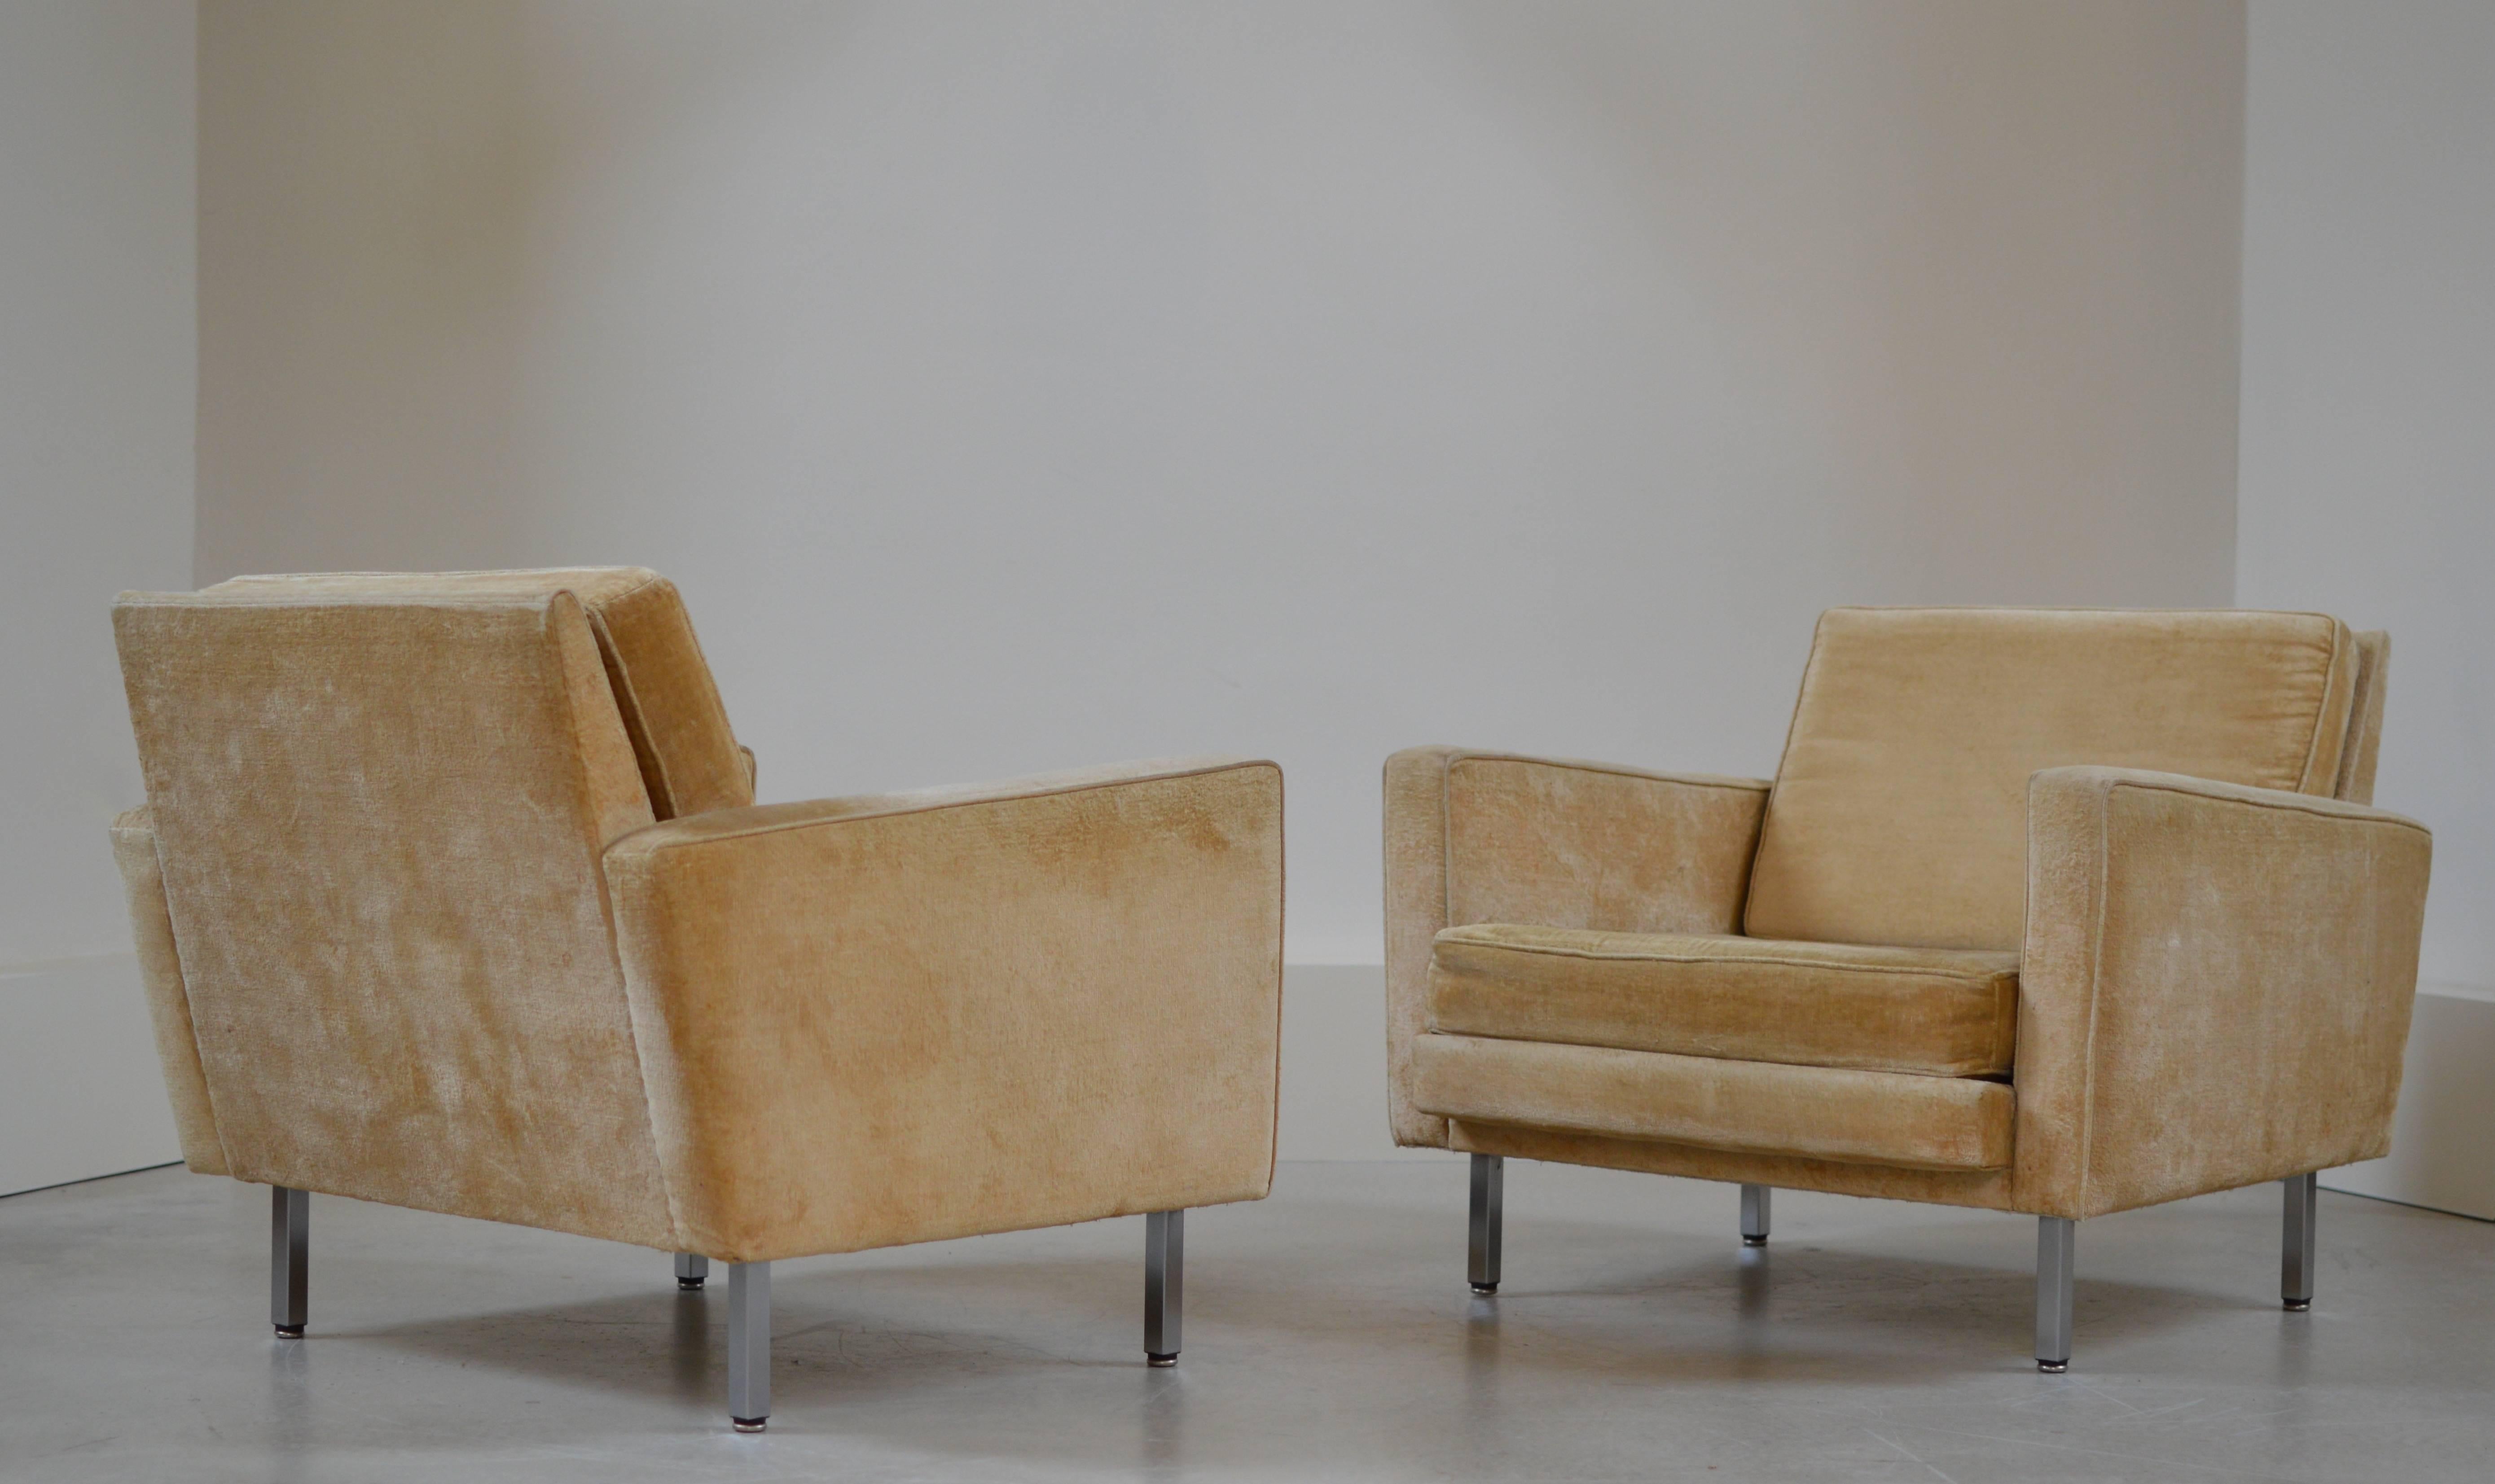 Pair of model 'Loose Cushion' arm chairs / model N° 5681 by George Nelson, originally drawn in 1955 and produced by Herman Miller from 1956 to 1967 executed with square legs. 
